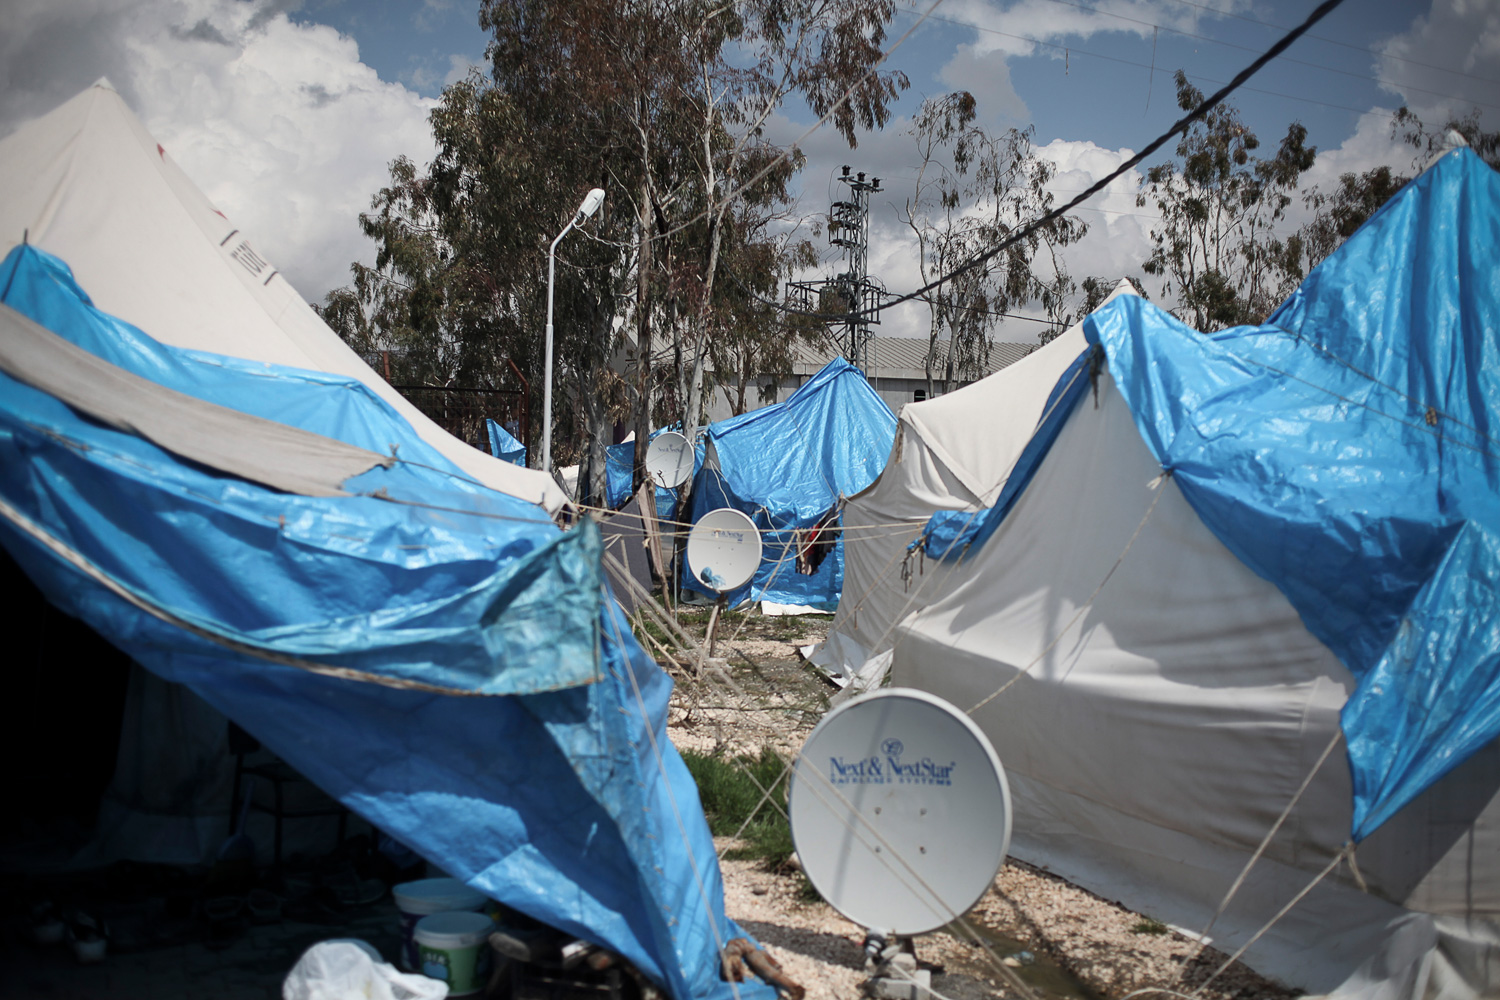 March 29, 2012. Satellite dishes are seen outside of tents at an old cigar factory that was converted into a Syrian refugee camp near Antakya in southern Turkey near the border with Syria.